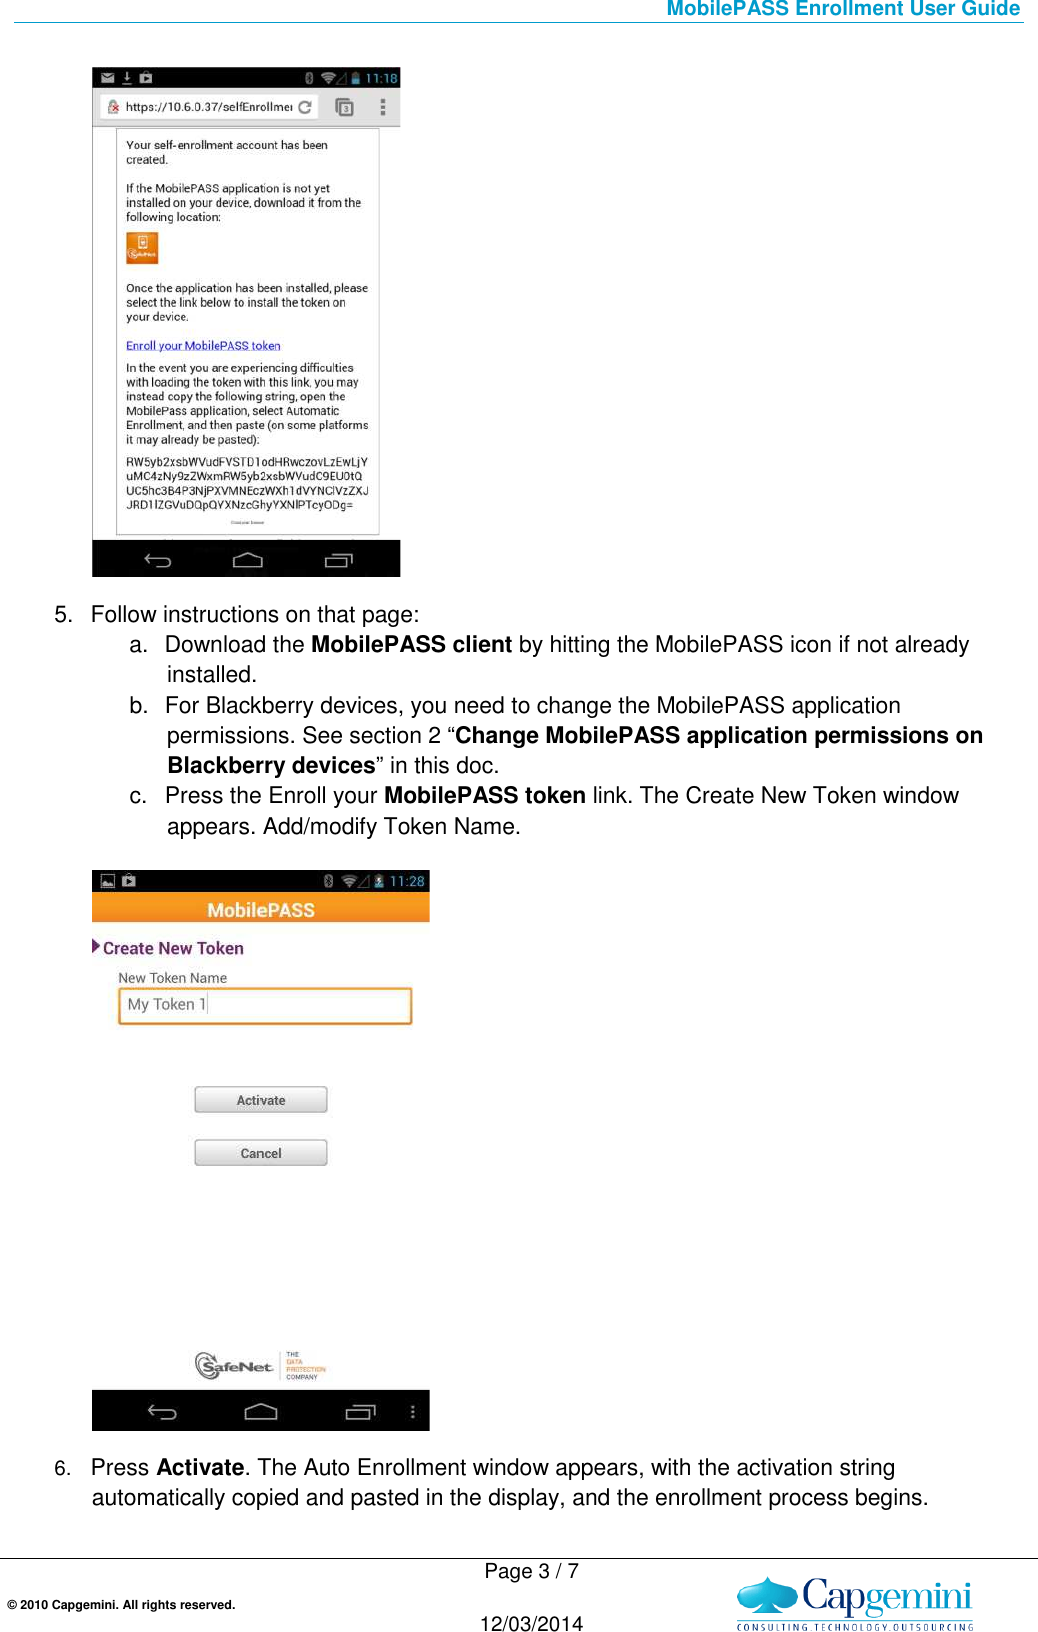 Page 4 of 7 - MobilePASS Enrollment User Guide Mobile PASS